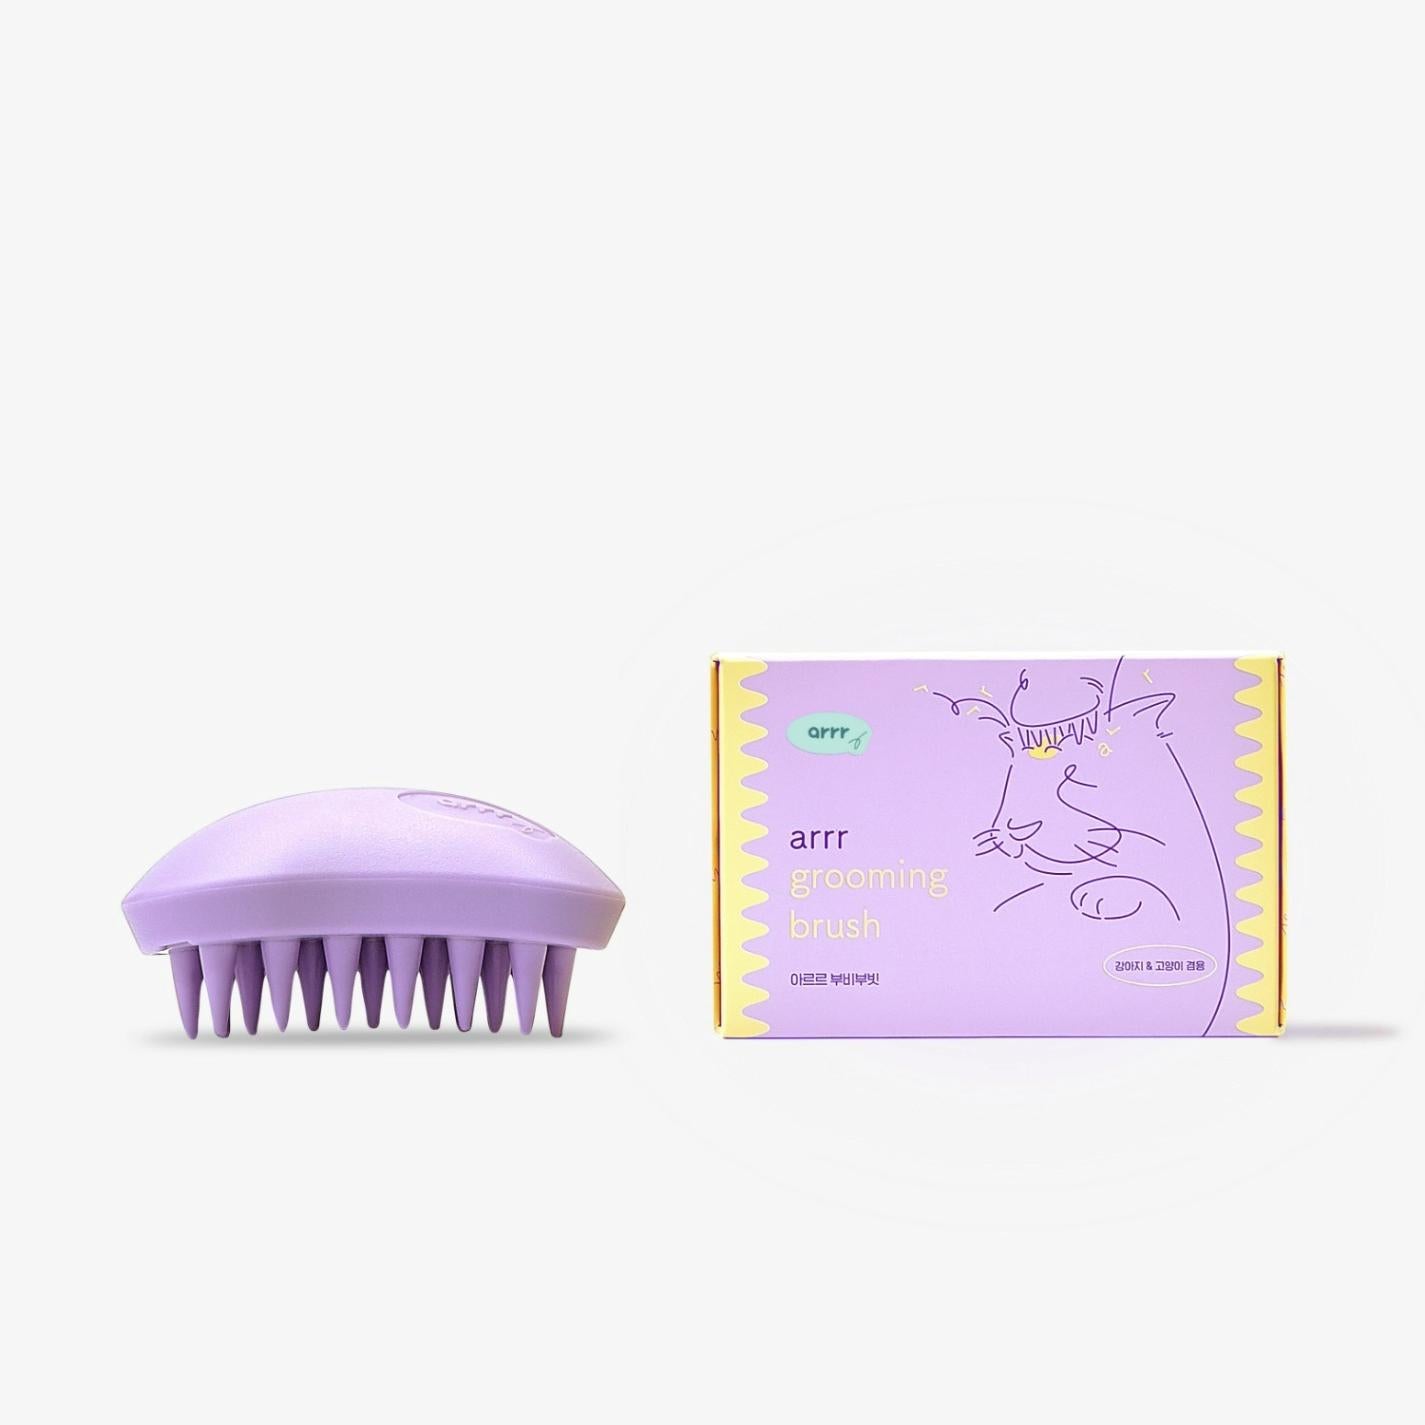 Korea-made pet grooming brush for cats and dogs. 100% natural rubber brush removes loose hair and tangles gently, while the curved design provides a stable grip. The stylish purple color adds a touch of flair to grooming time.